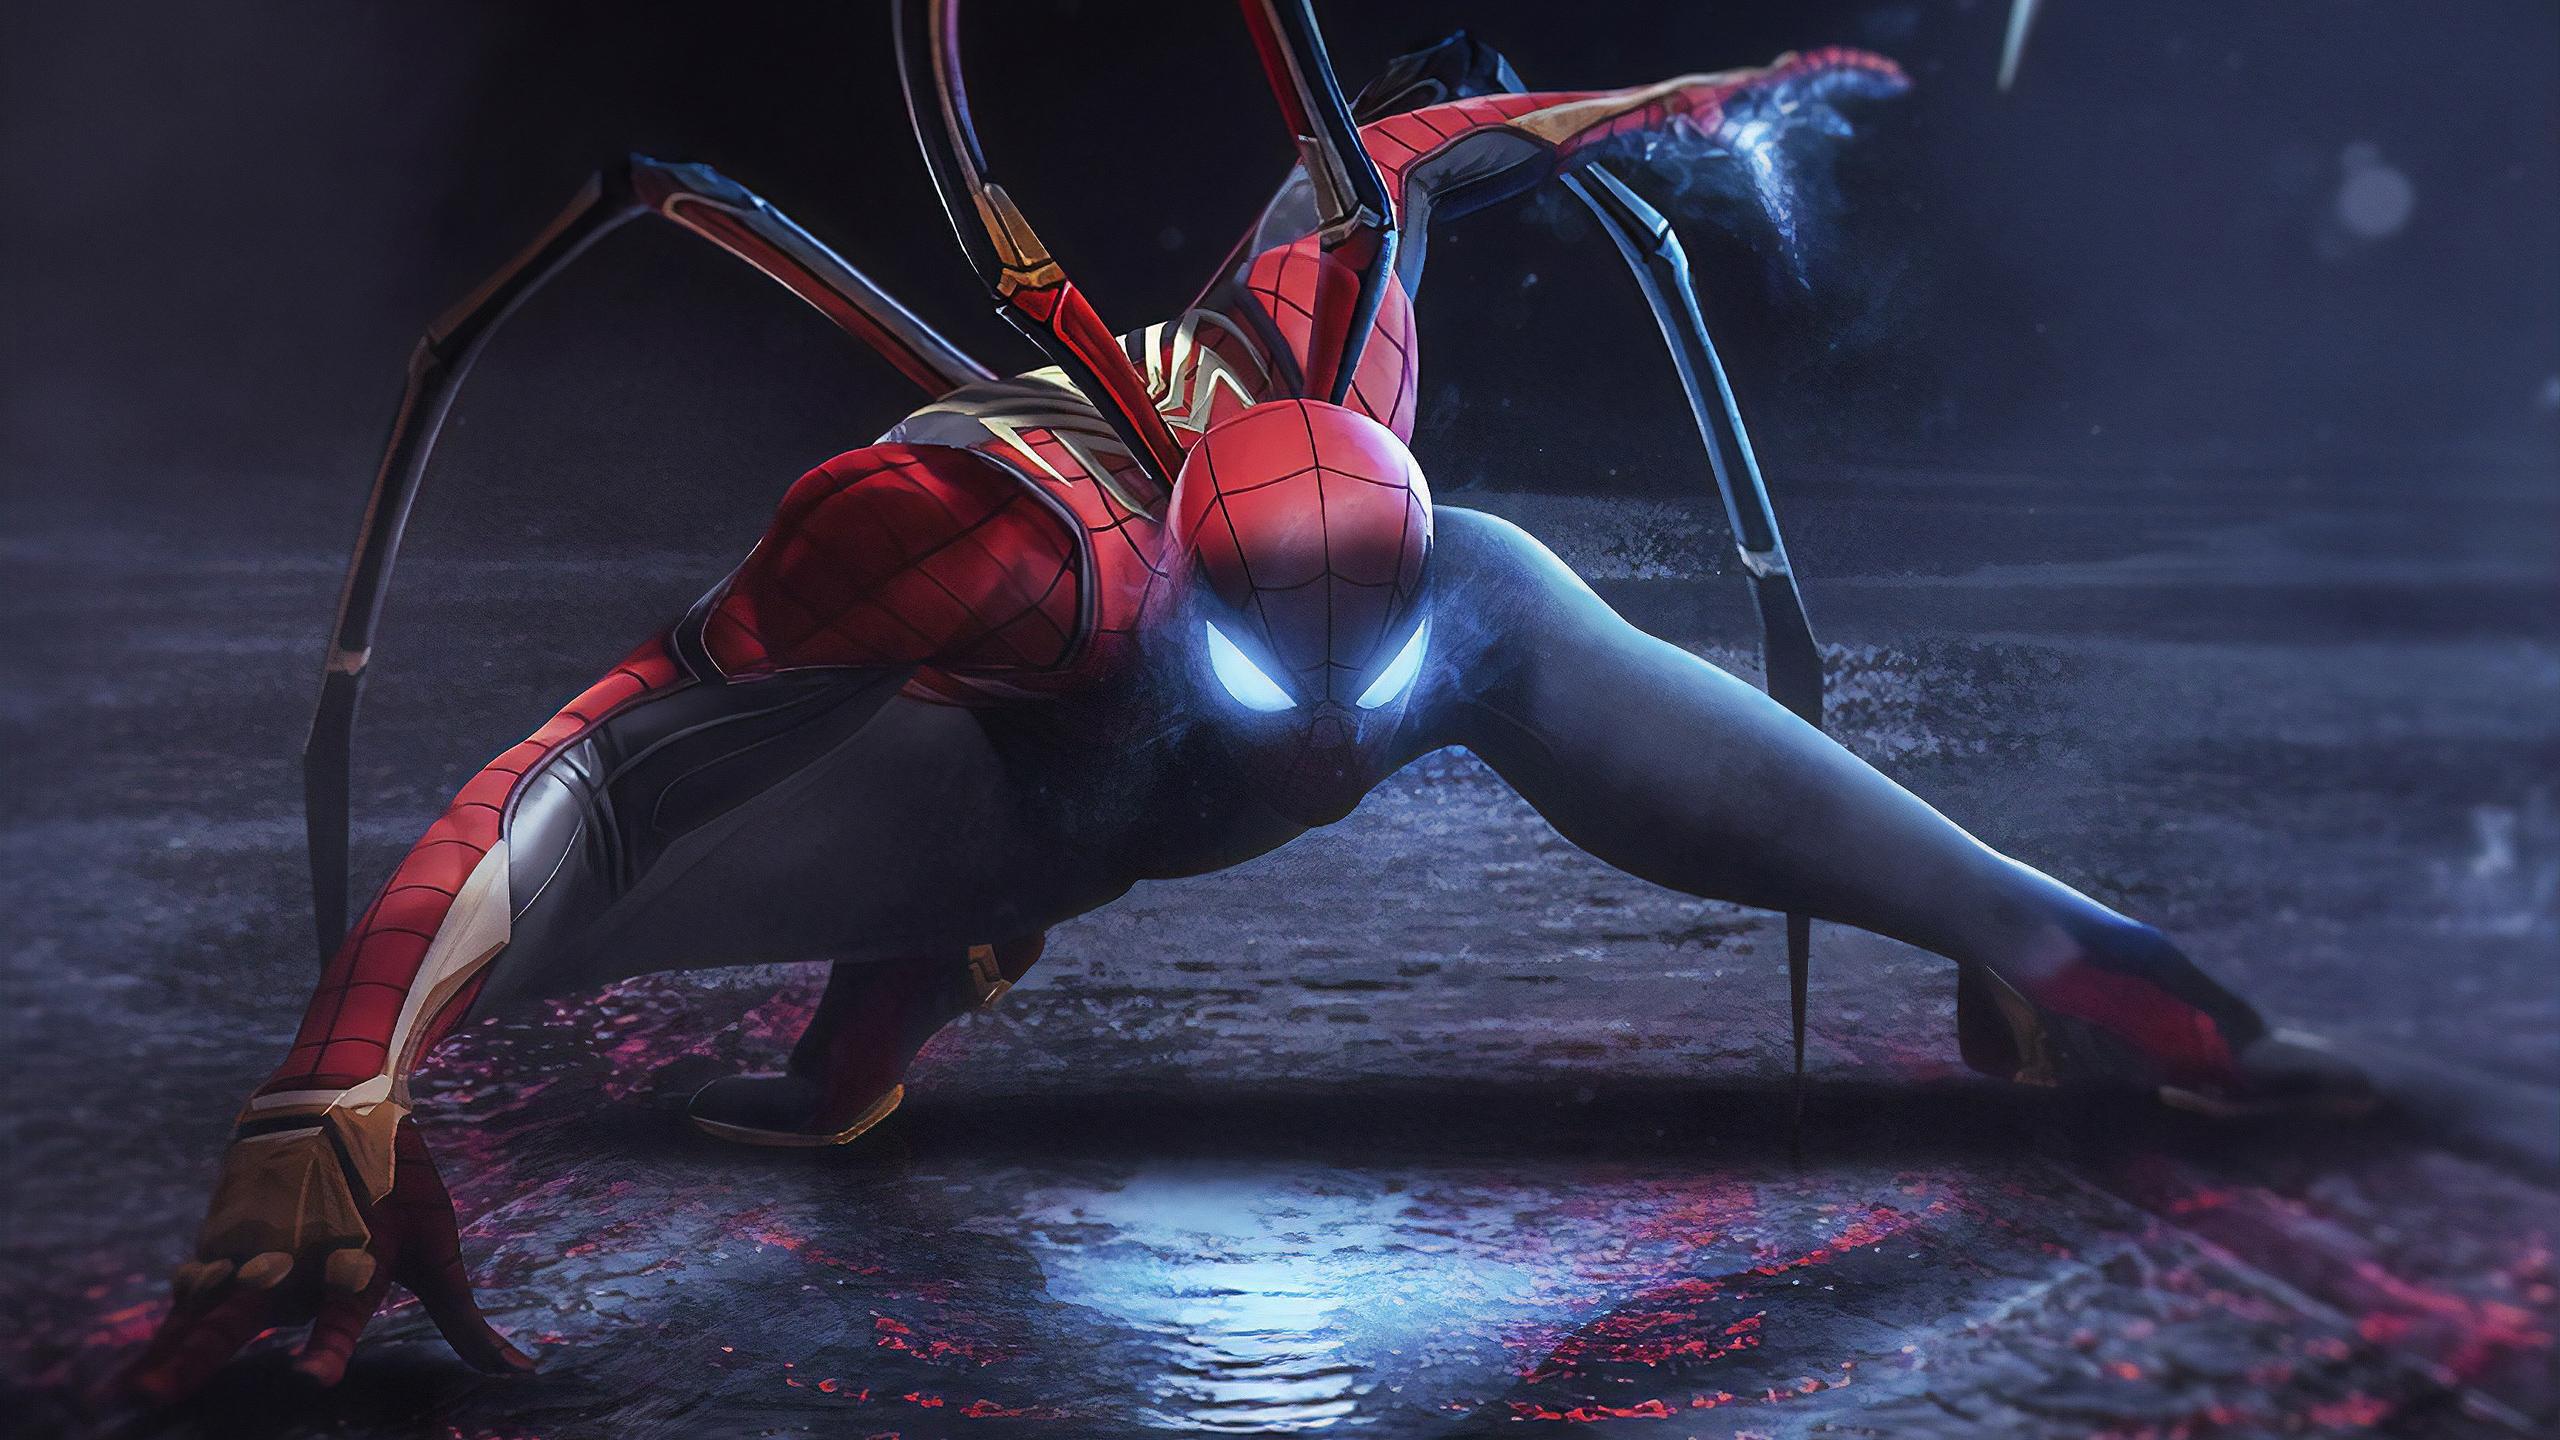 2560 x 1440 · jpeg - Spider Man Armour, HD Superheroes, 4k Wallpapers, Images, Backgrounds ...